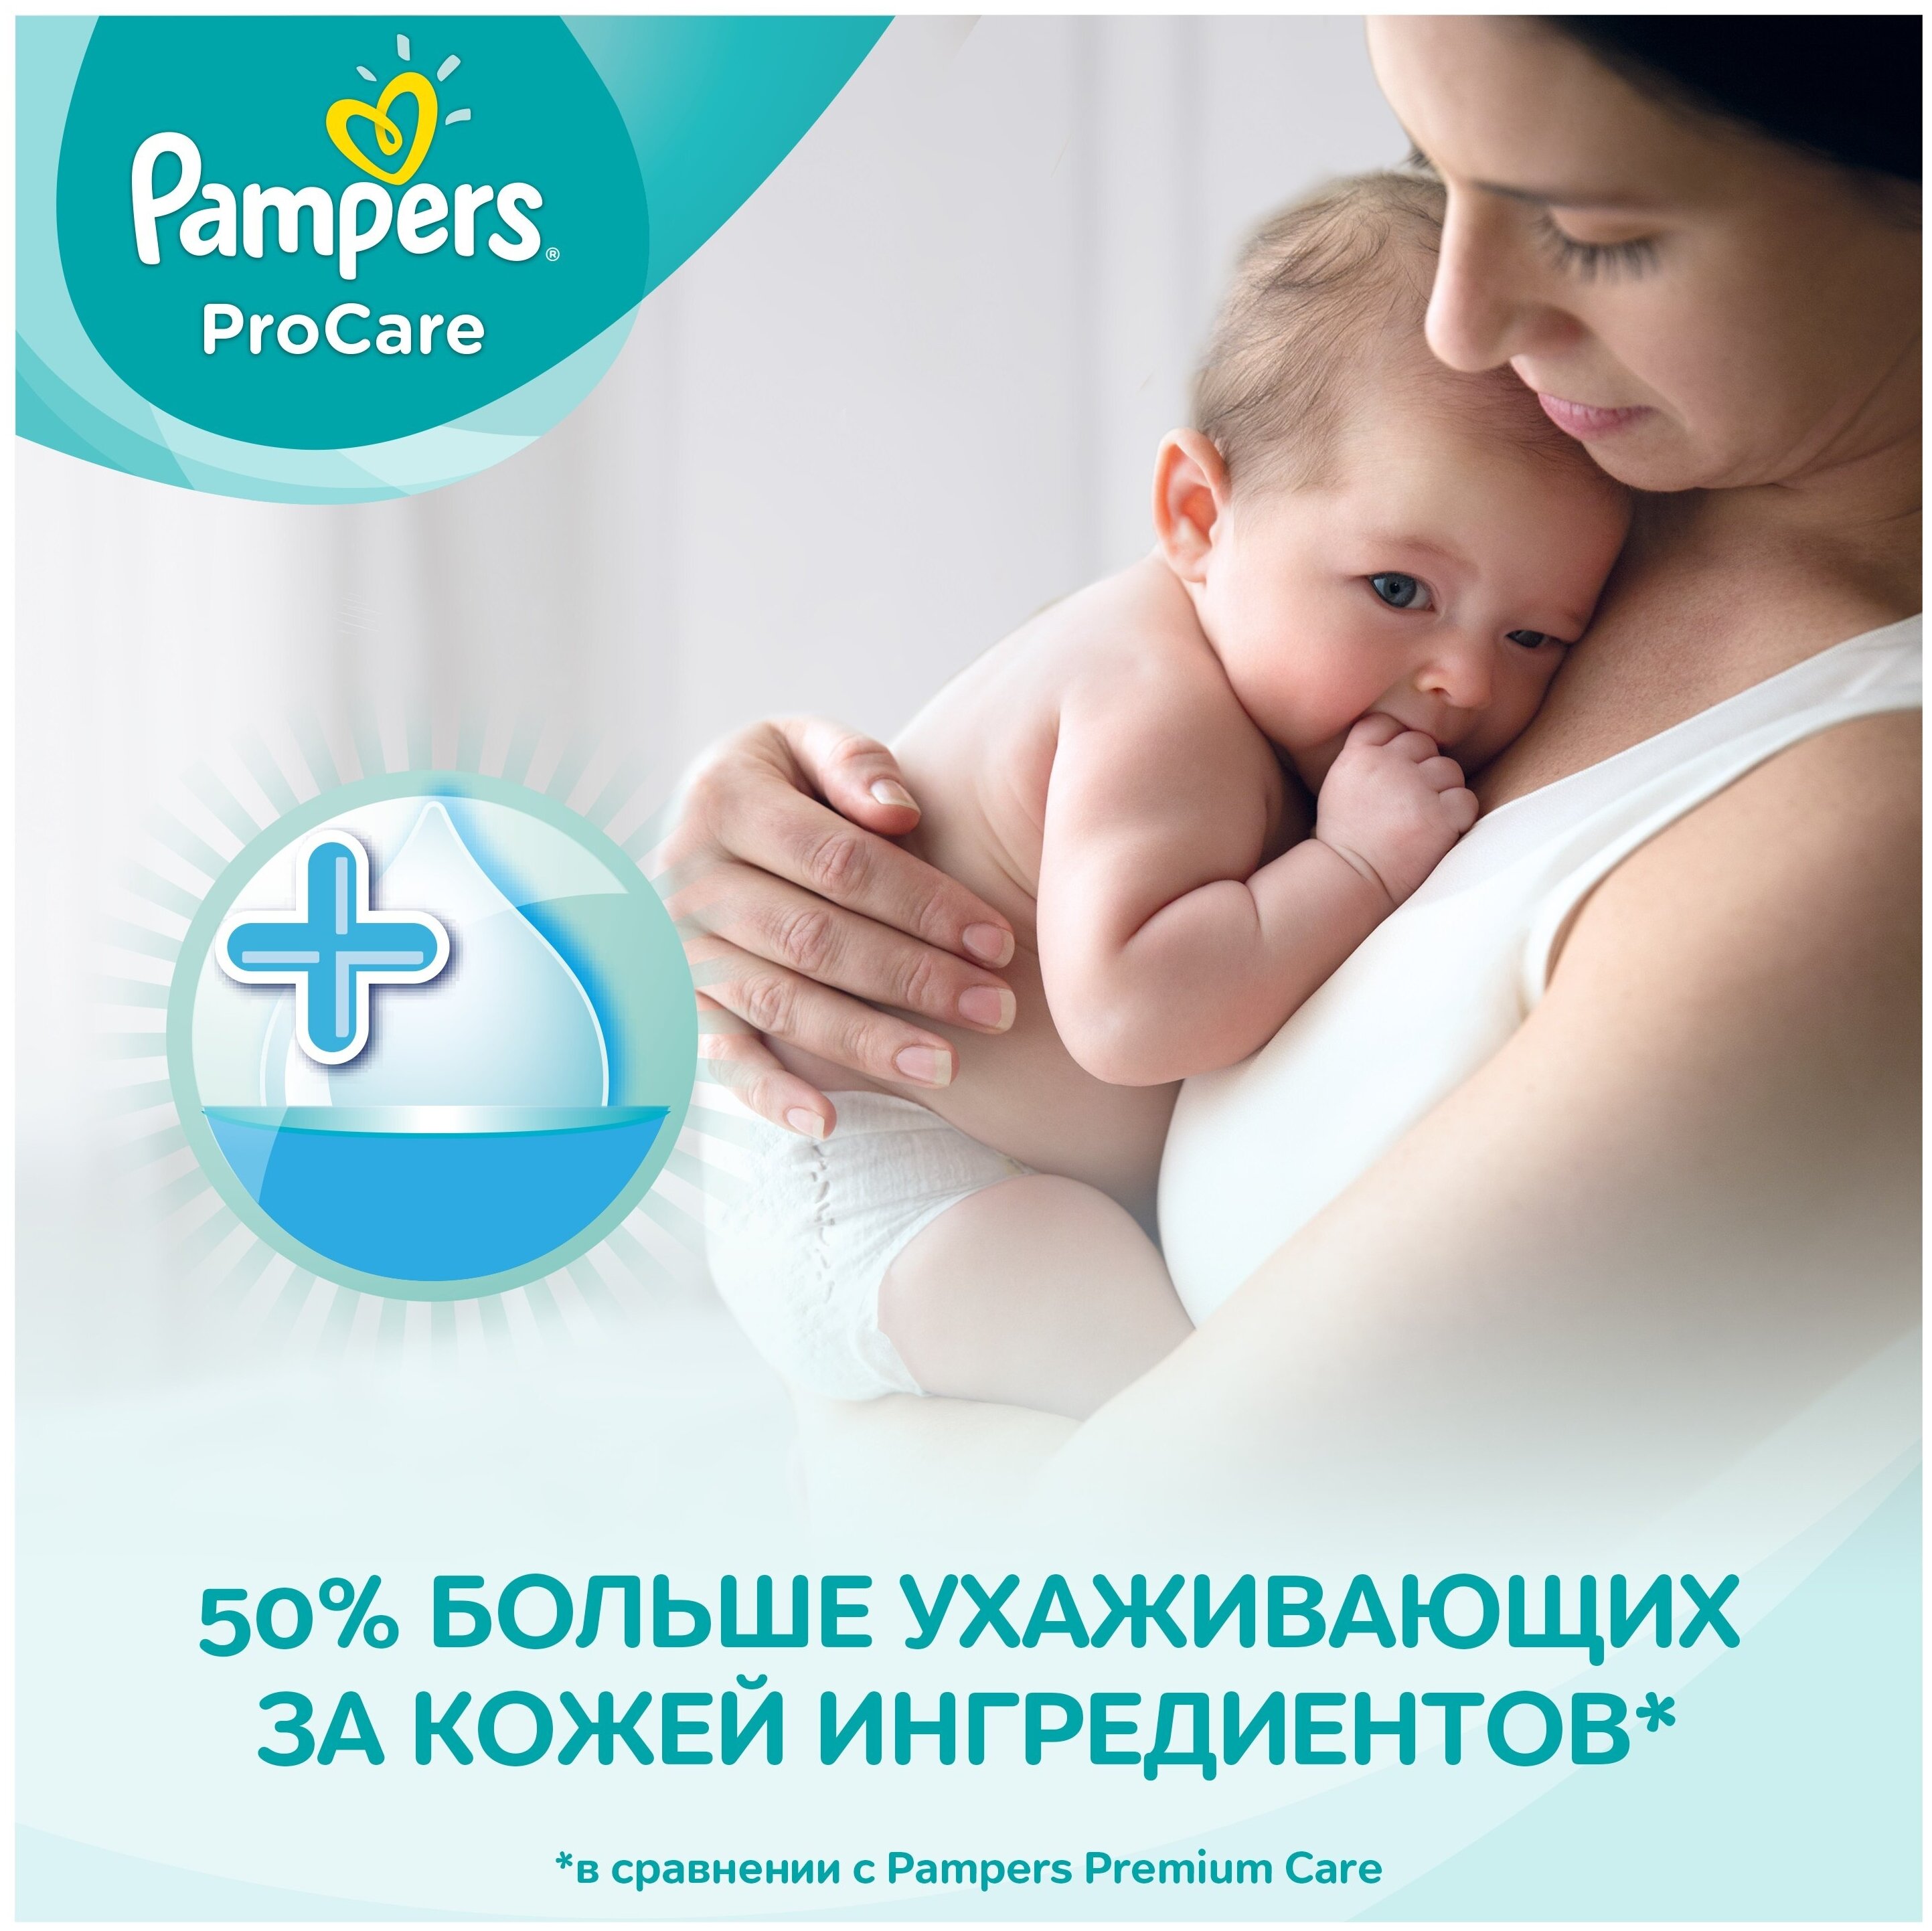 pampers procare 2